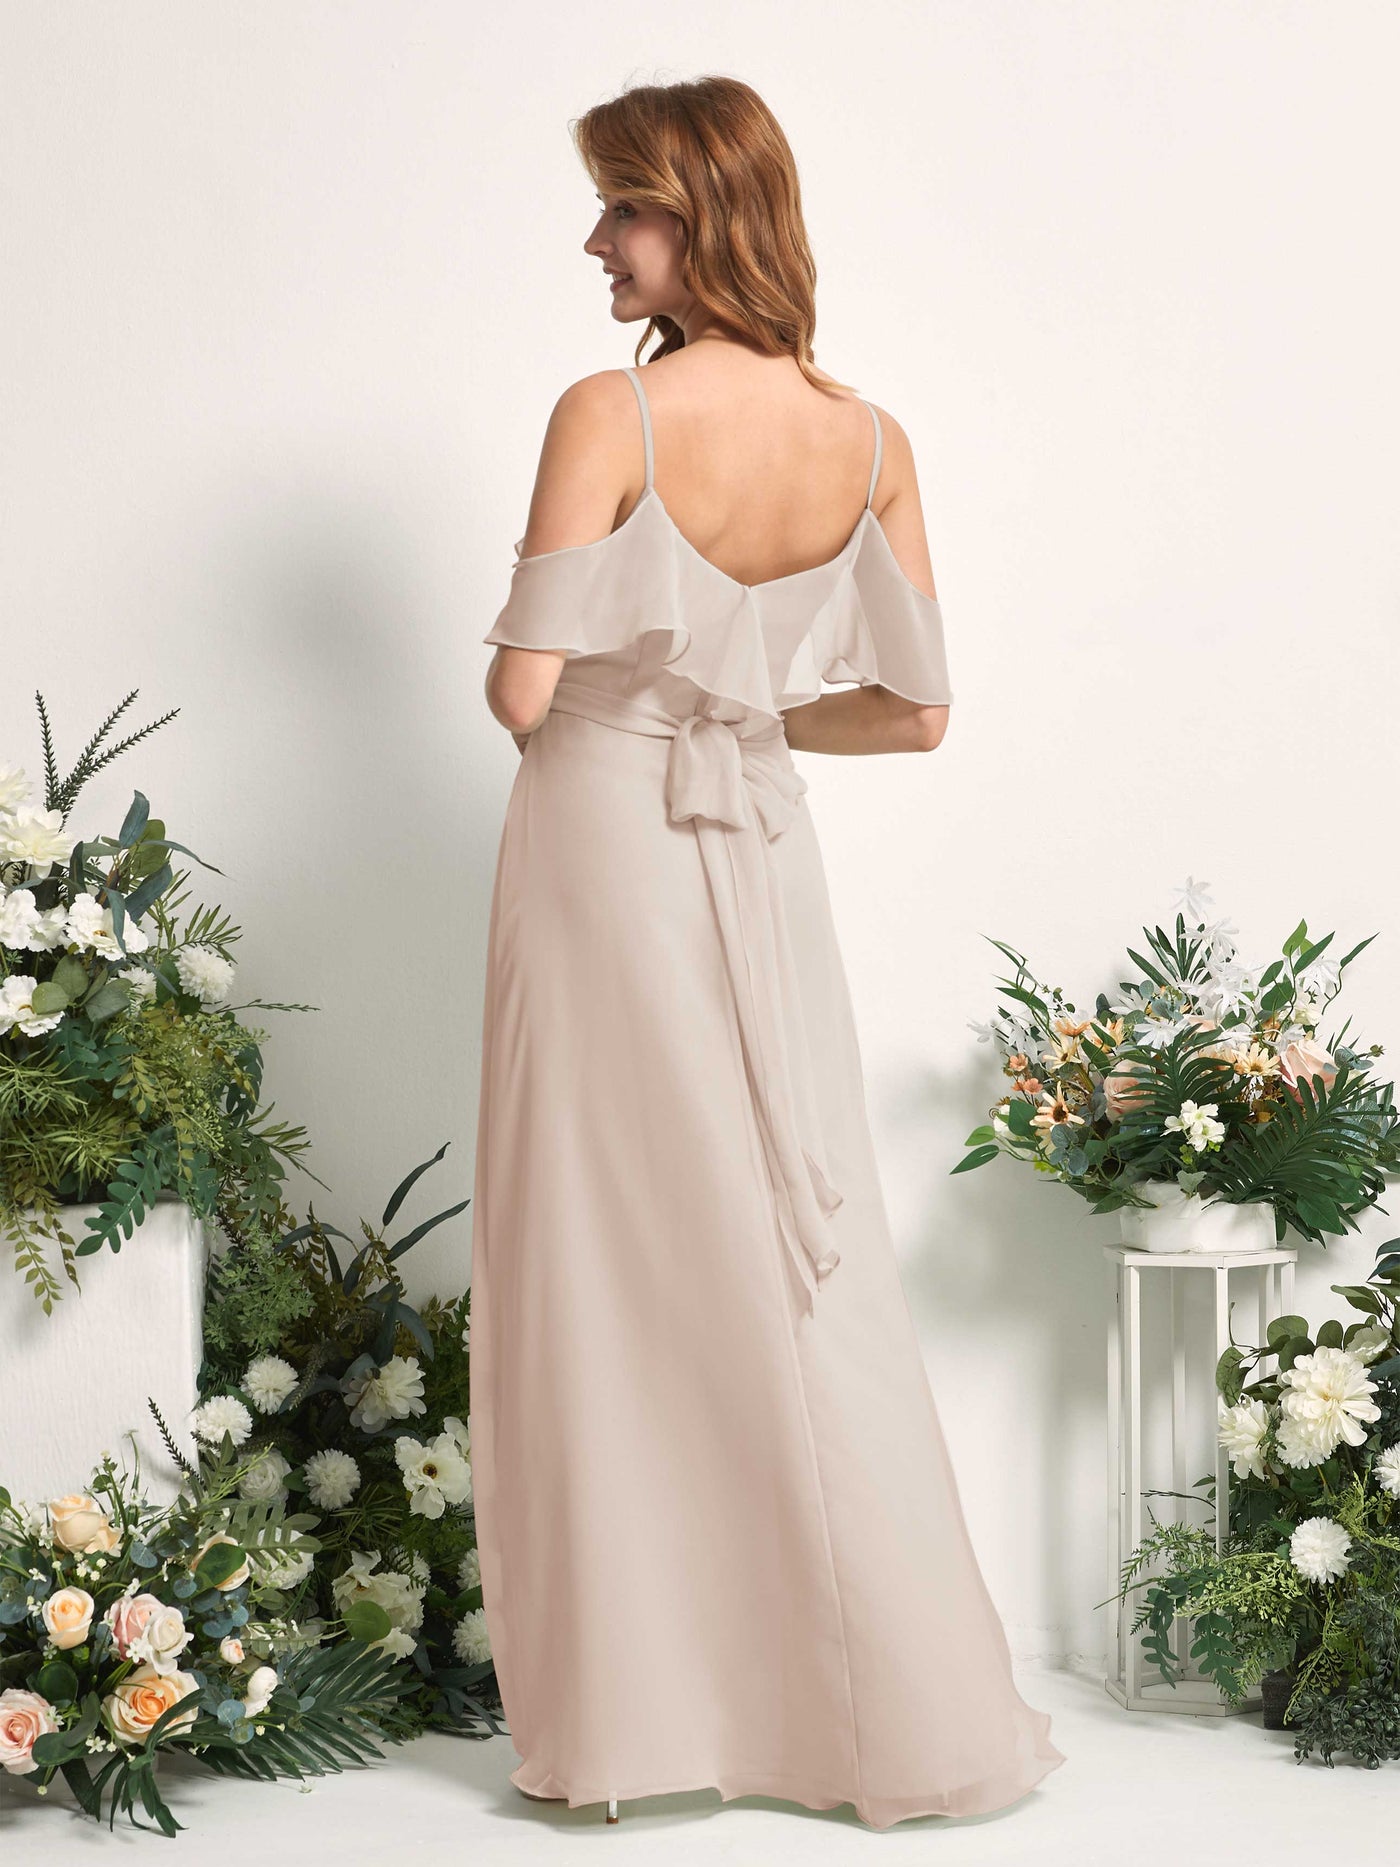 Bridesmaid Dress A-line Chiffon Spaghetti-straps Full Length Sleeveless Wedding Party Dress - Champagne (81227416)#color_champagne